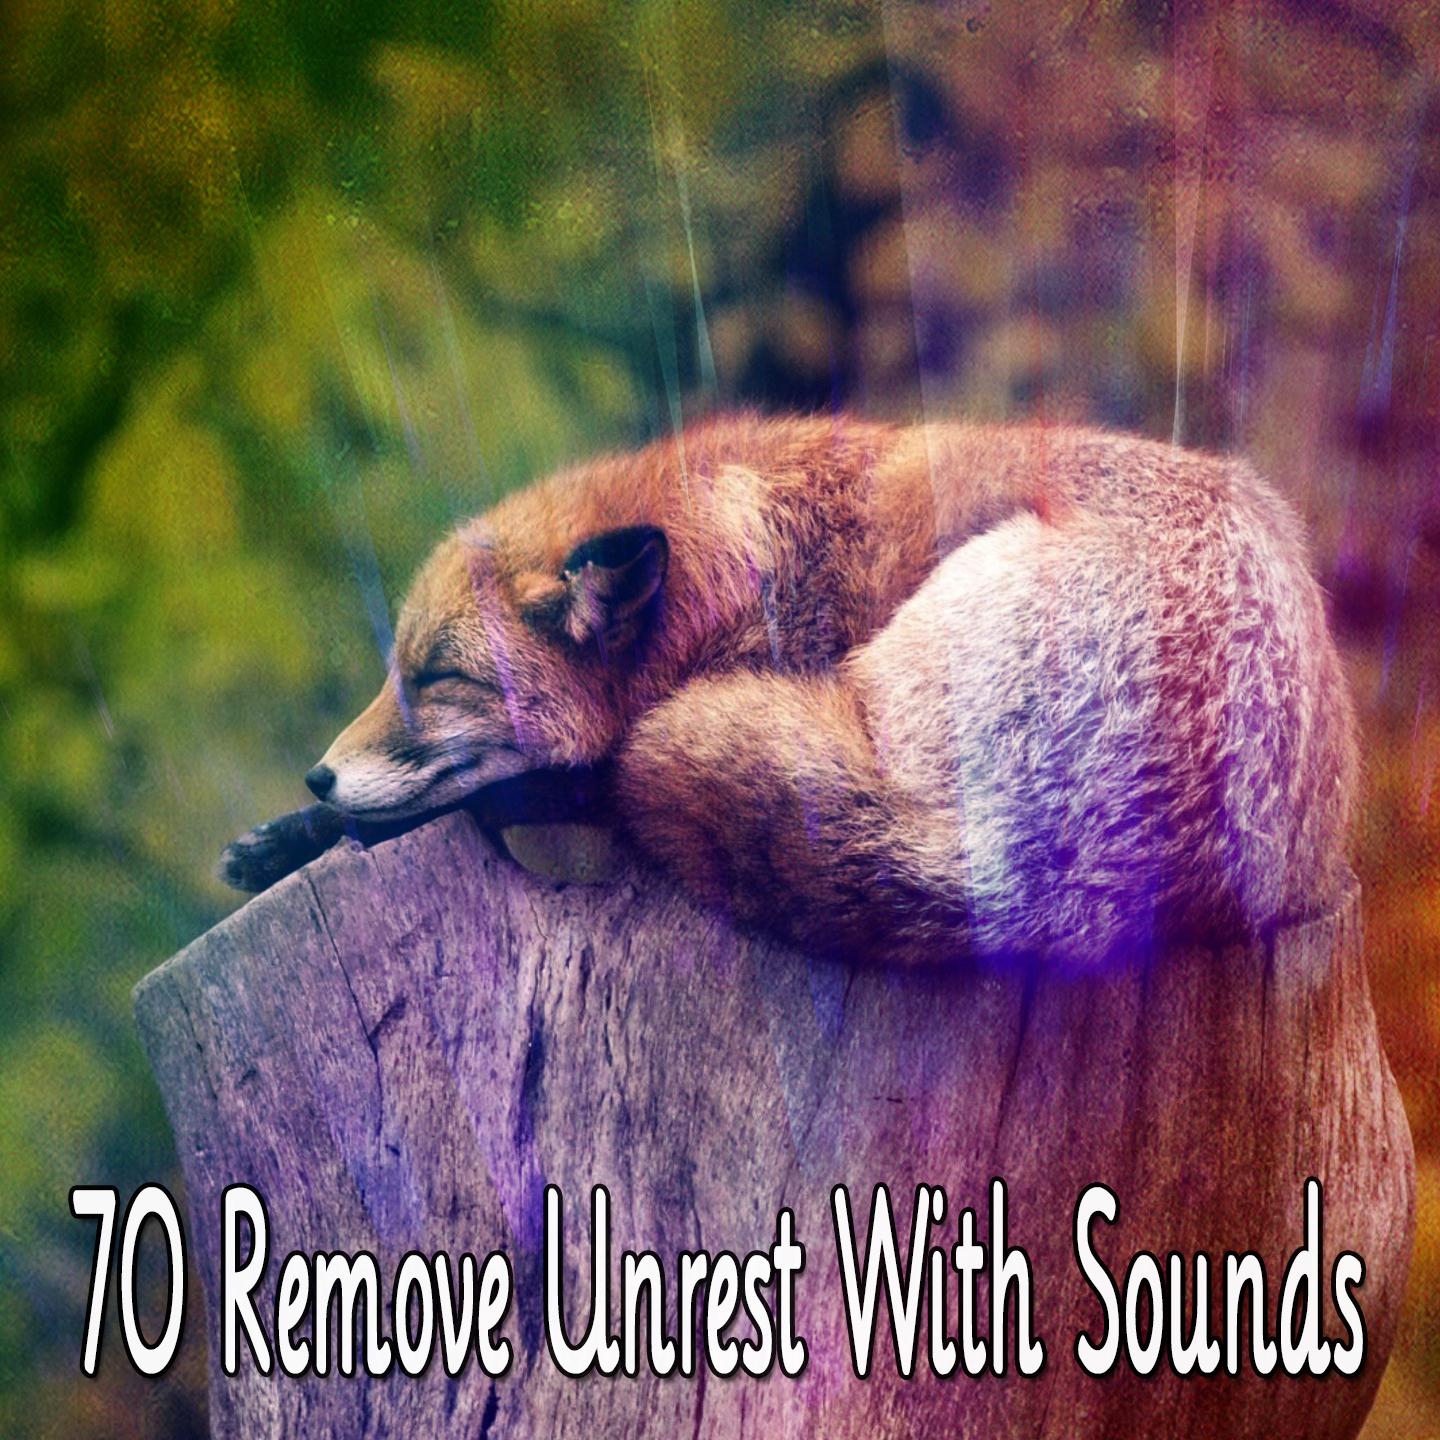 70 Remove Unrest With Sounds